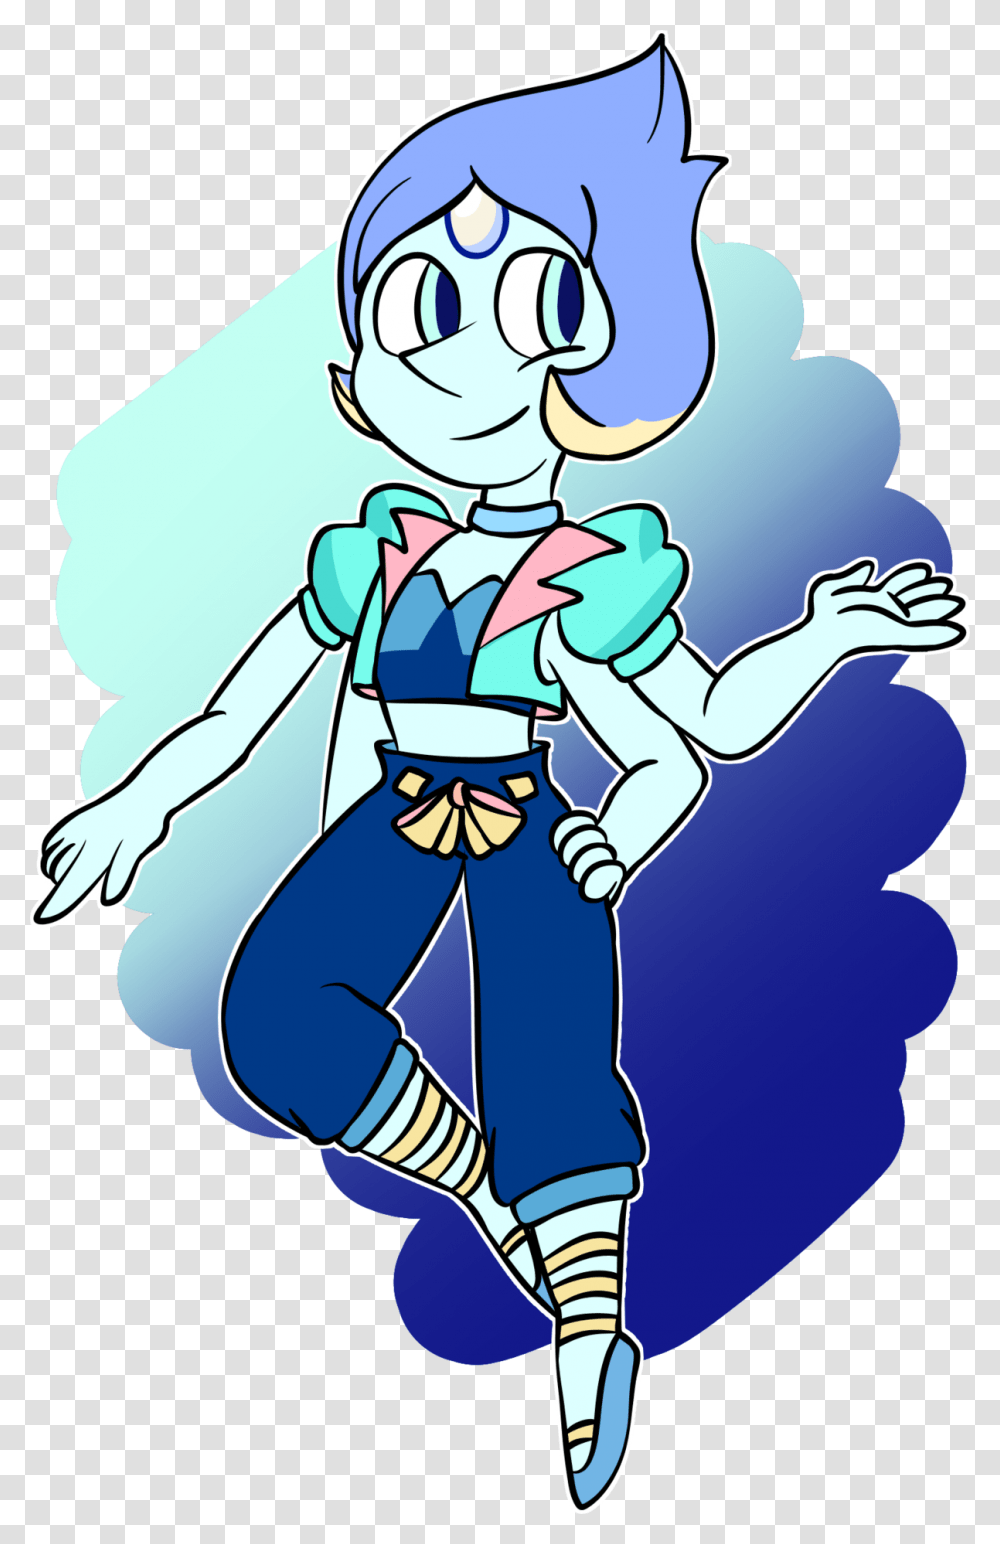 Crystal Gem Pearlapis Fusion Rainbow Moonstone The Lapis Lazuli Pearl Fusion, Advertisement, Poster, Hand Transparent Png